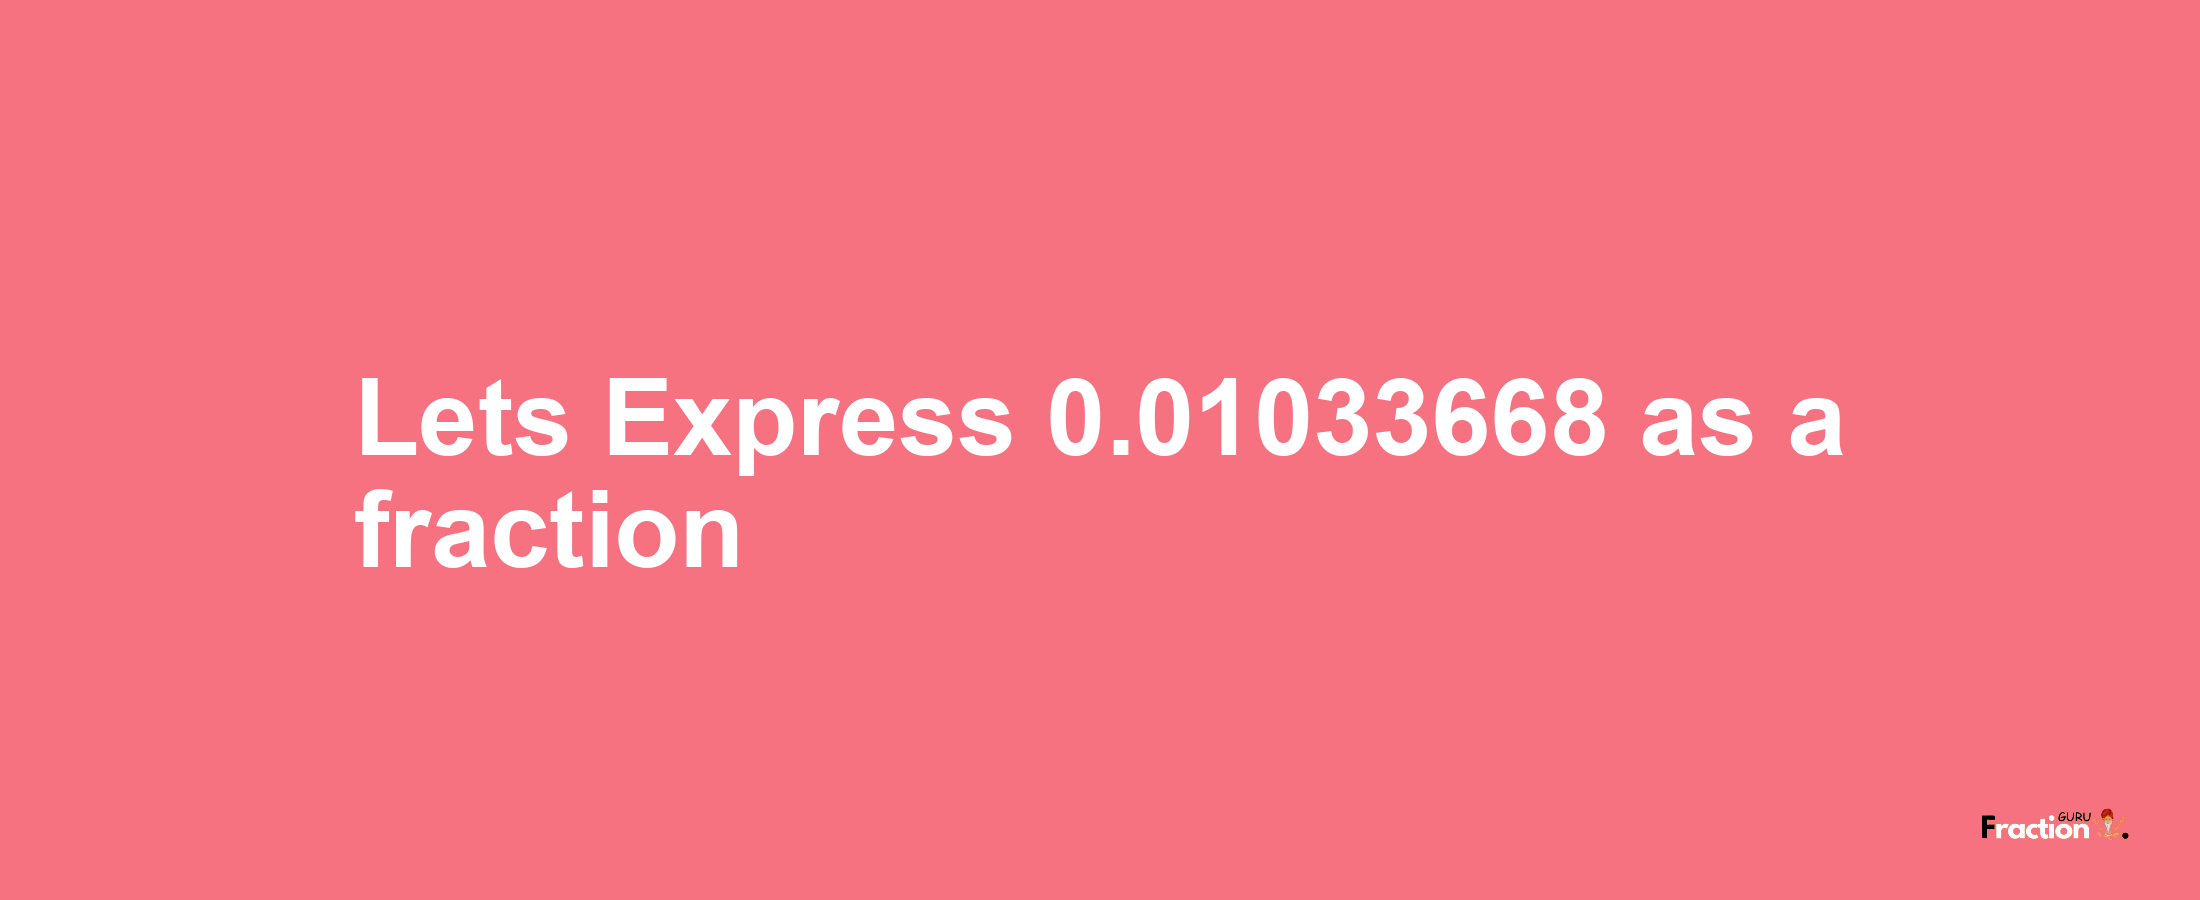 Lets Express 0.01033668 as afraction